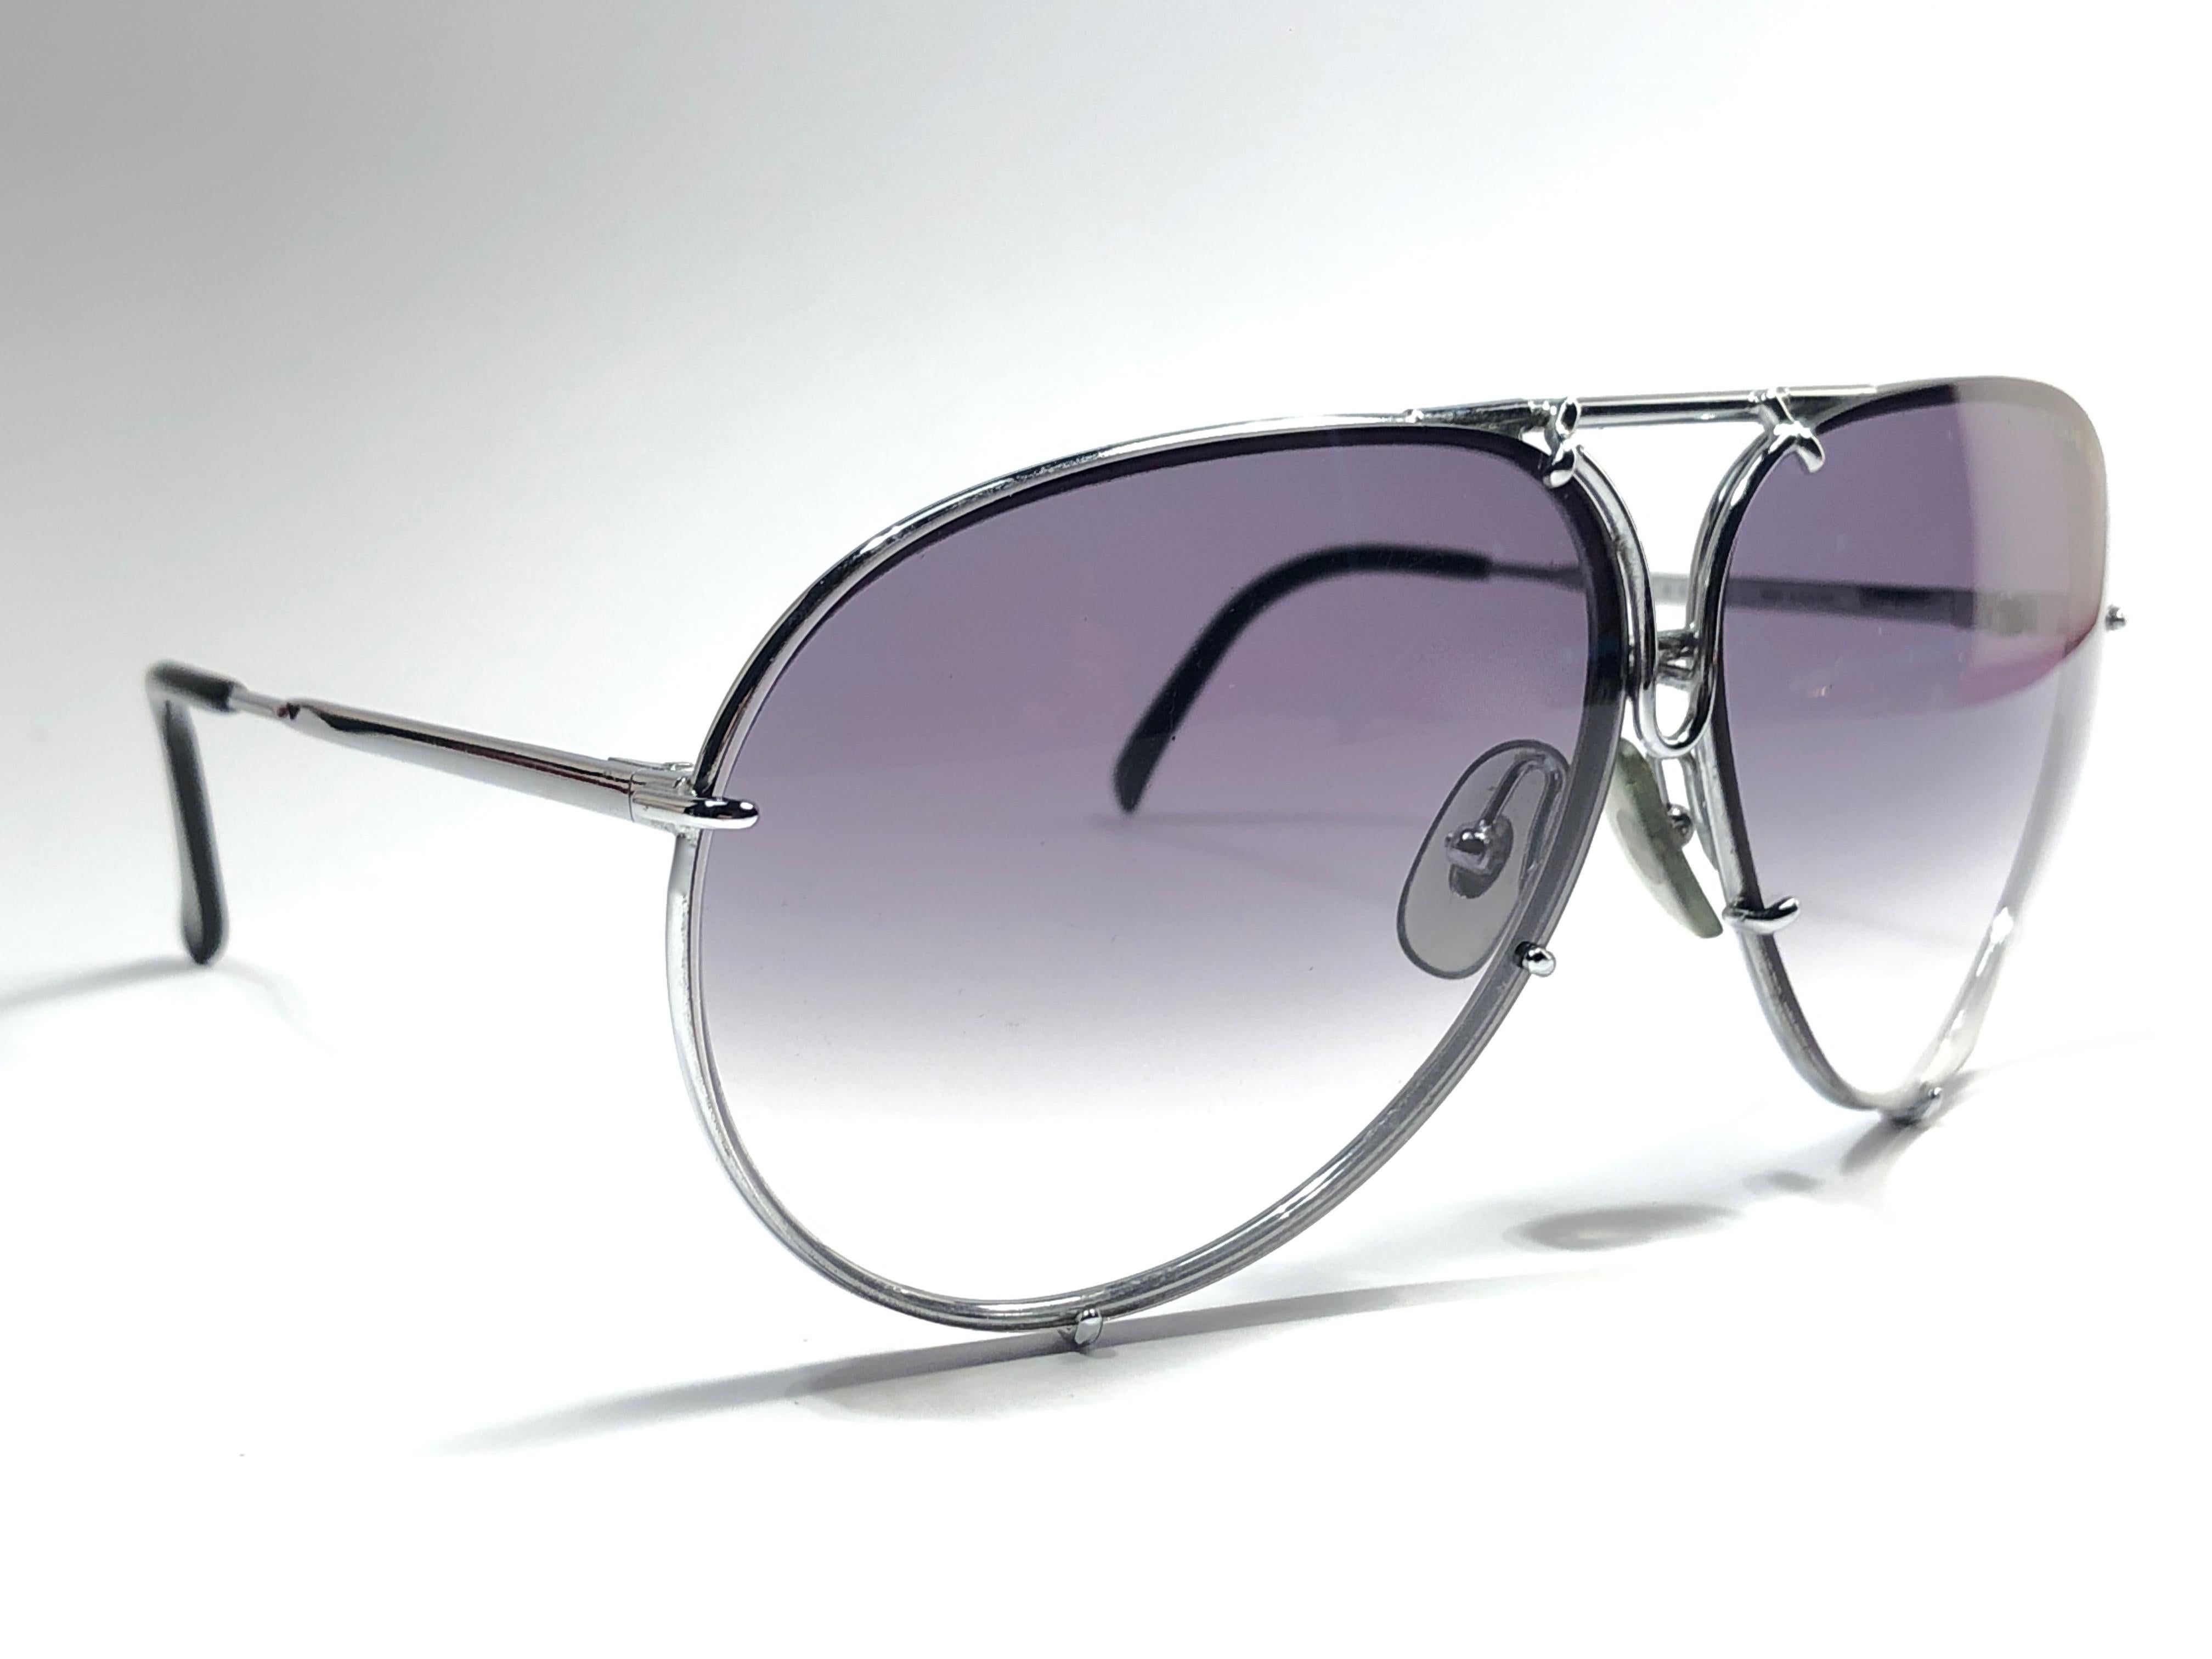 New 1980's Porsche Design 5623 silver oversized frame with grey gradient lenses.  

Amazing craftsmanship and quality.  
Comes with the original black Porsche hard case thats has some wear on it due to nearly 40 years of storage. This item show